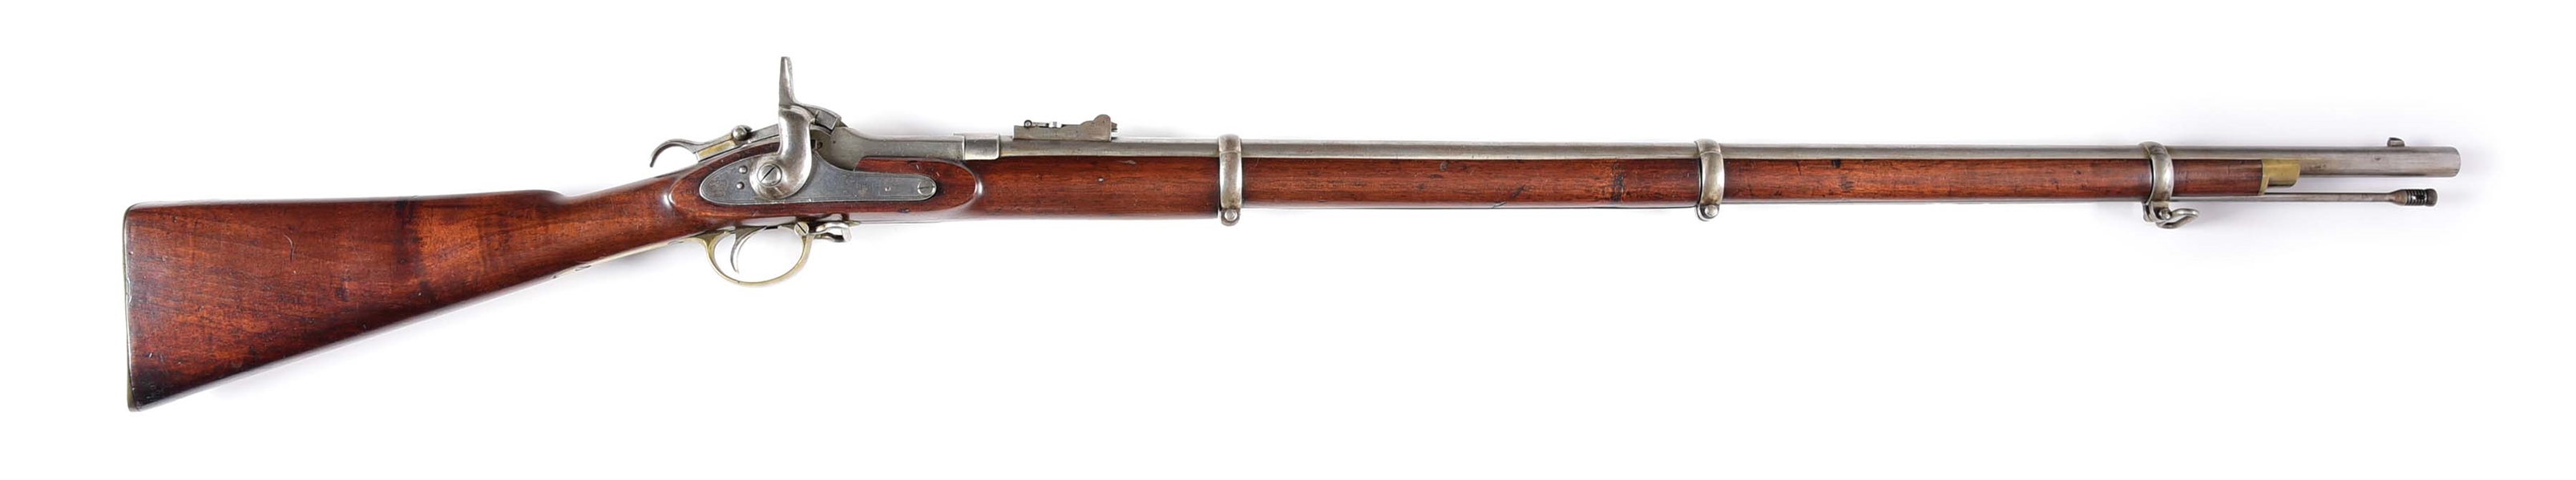 (A) SCARCE ROBERTS BREECH LOADING CONVERSION ON A CONFEDERATE 1863 TOWER ENFIELD MUSKET.